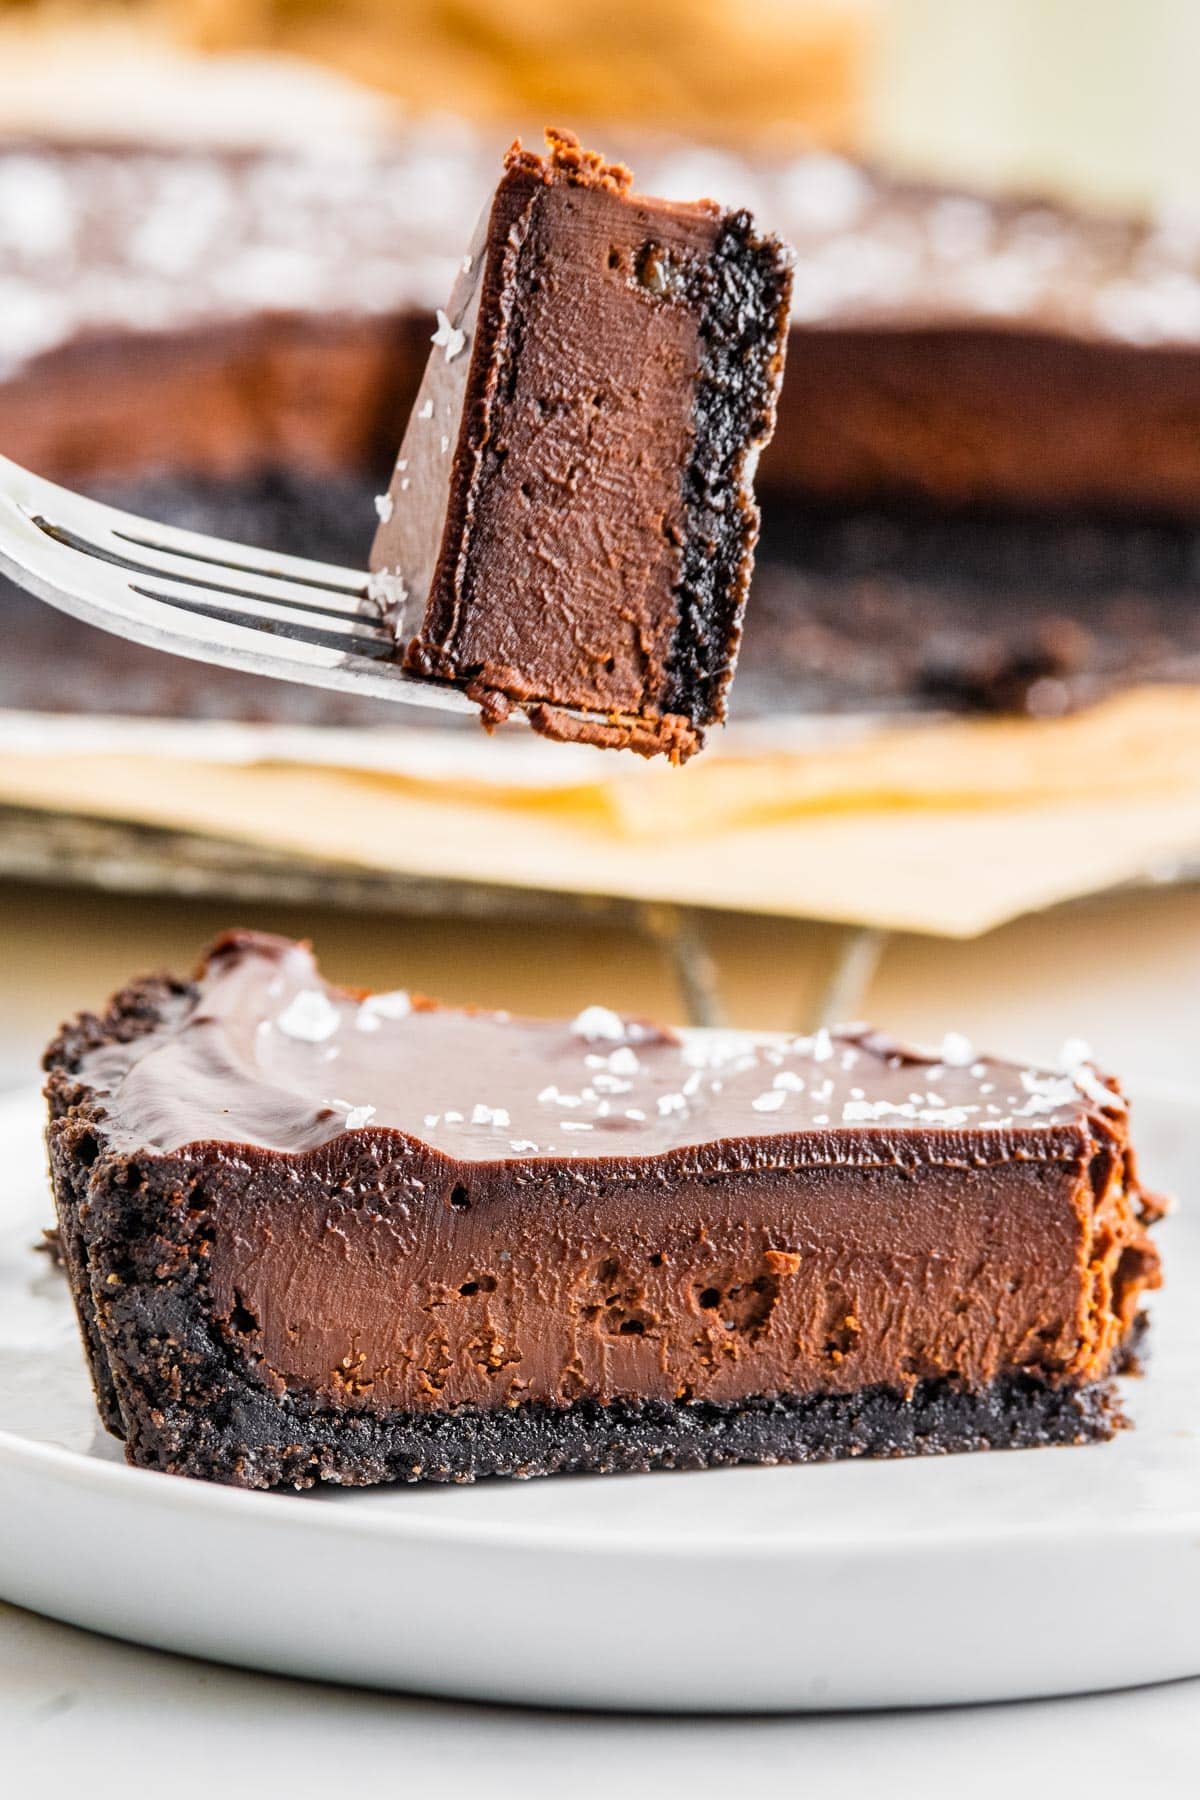 A close-up picture of a forkful of chocolate tart.